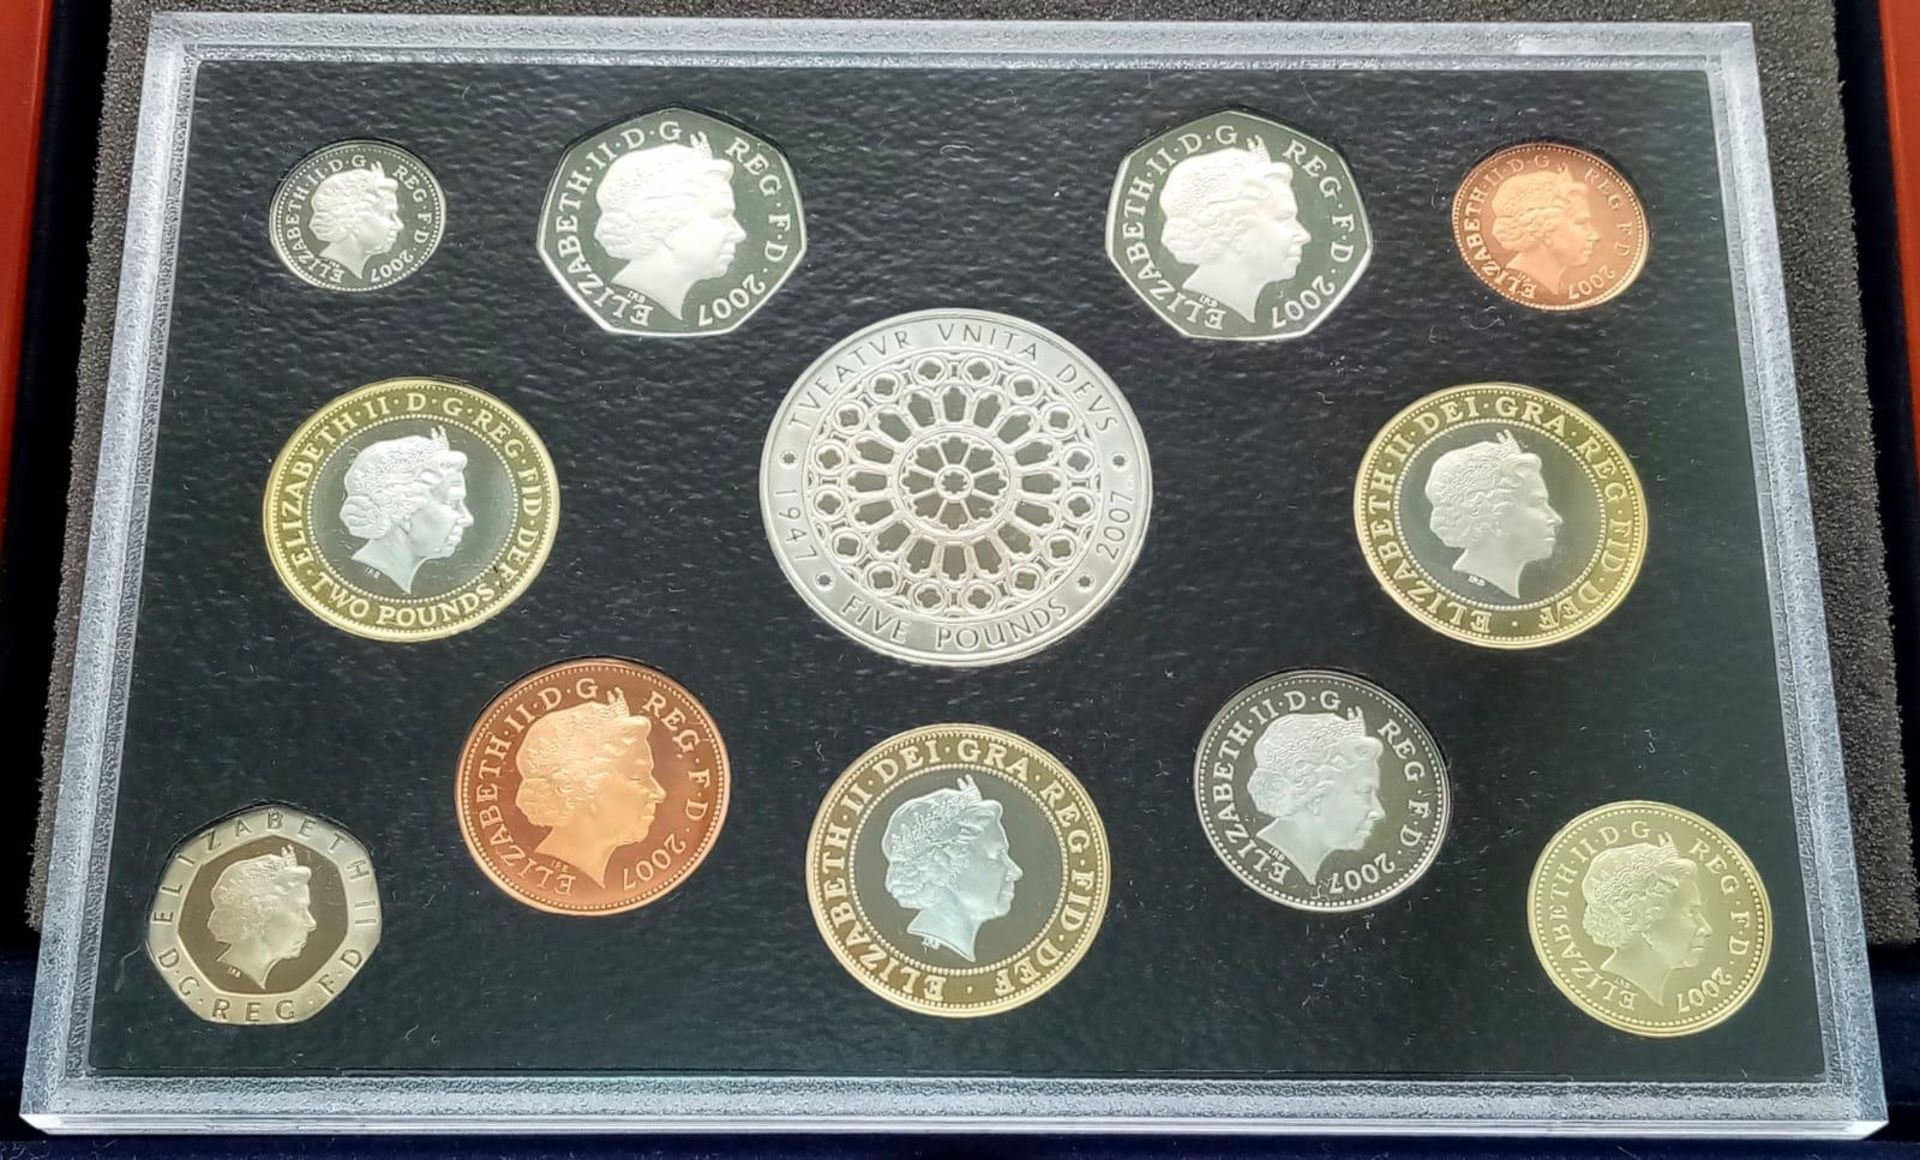 A Royal Mint 2007 Executive Proof Coin Set. 12 coins in total. Comes in a wood presentation case. - Image 2 of 4